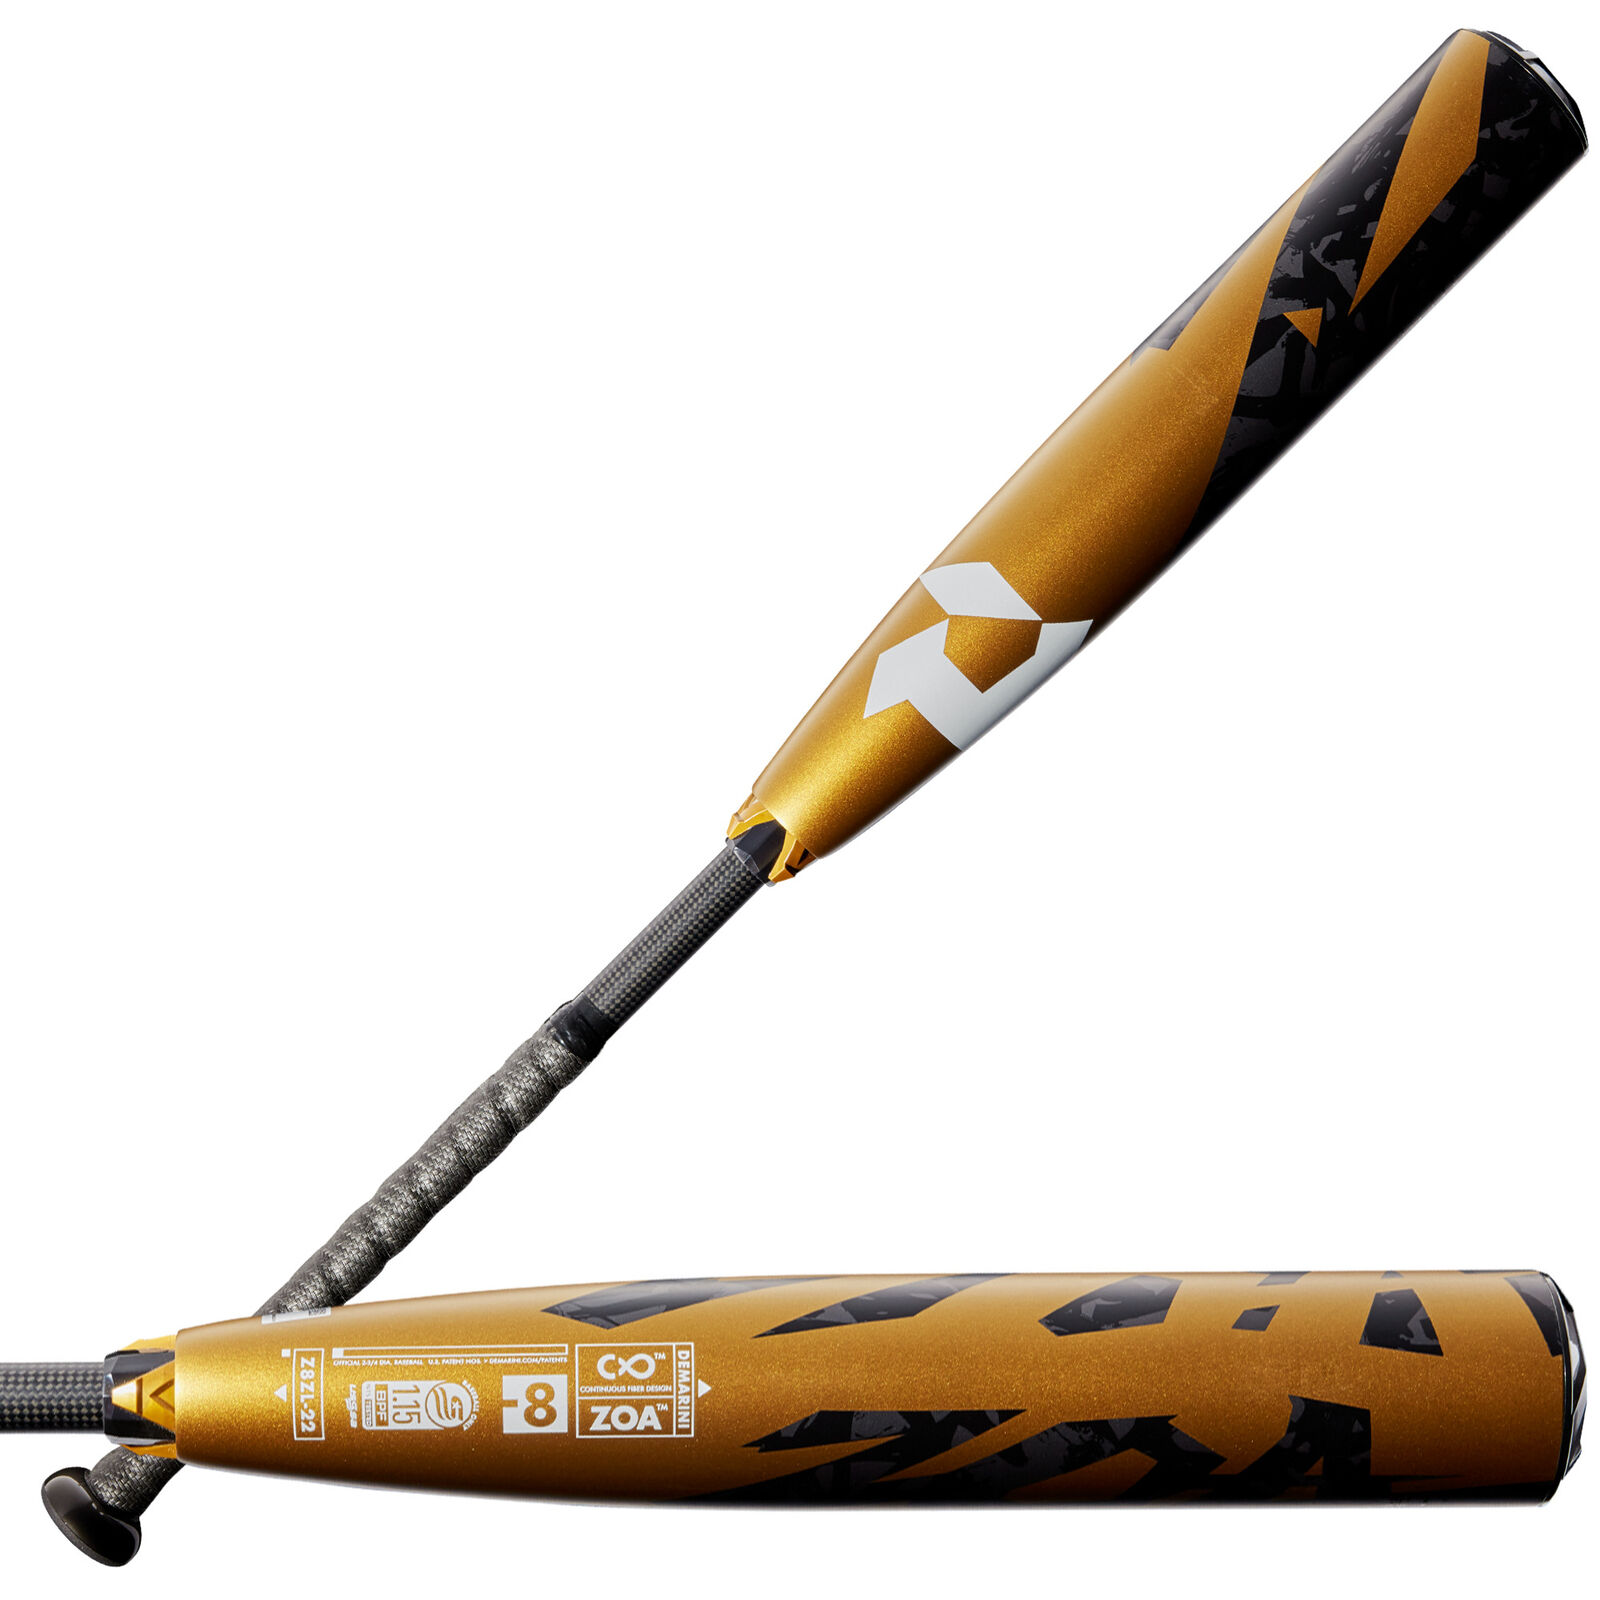 Rolled DeMarini ZOA -5 USSSA Bat From ProRollers Is Game Ready